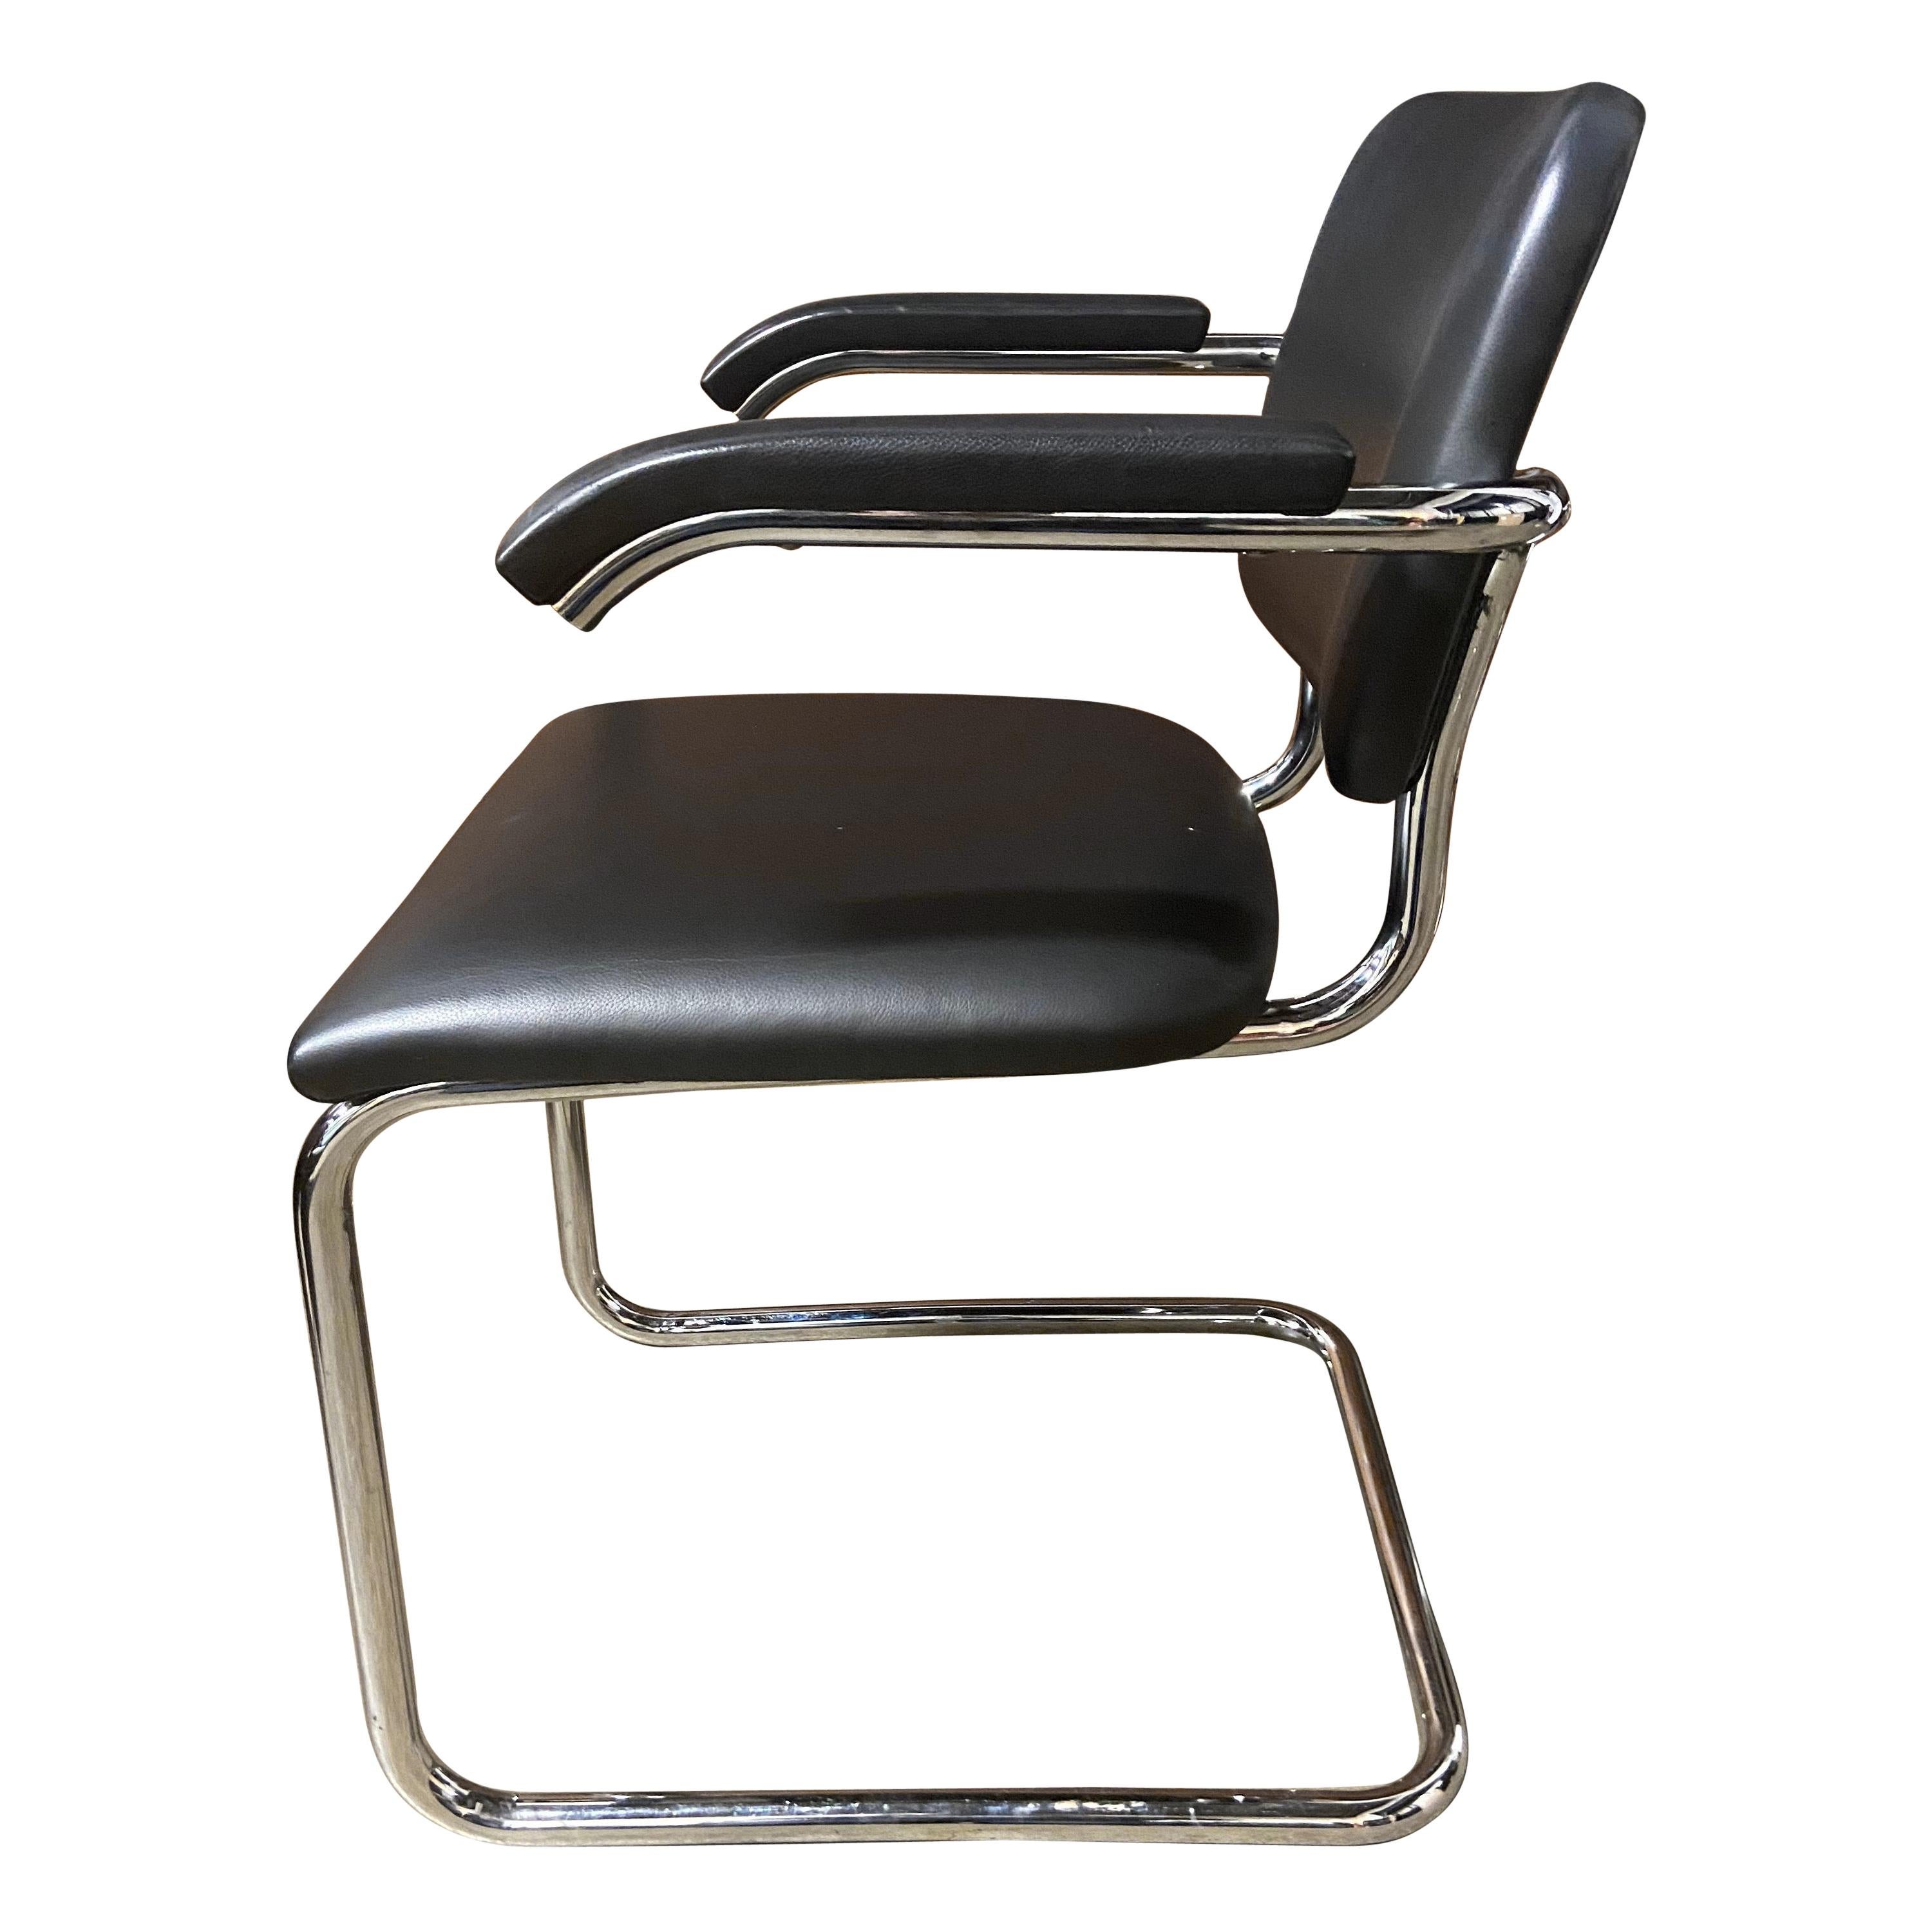 For your consideration are these wonderful Cesca chairs in striking black leather with shiny heavy chrome. Perfect for the home or office and ready for use showing little if any wear. We have a large quantity of these and all are branded with the